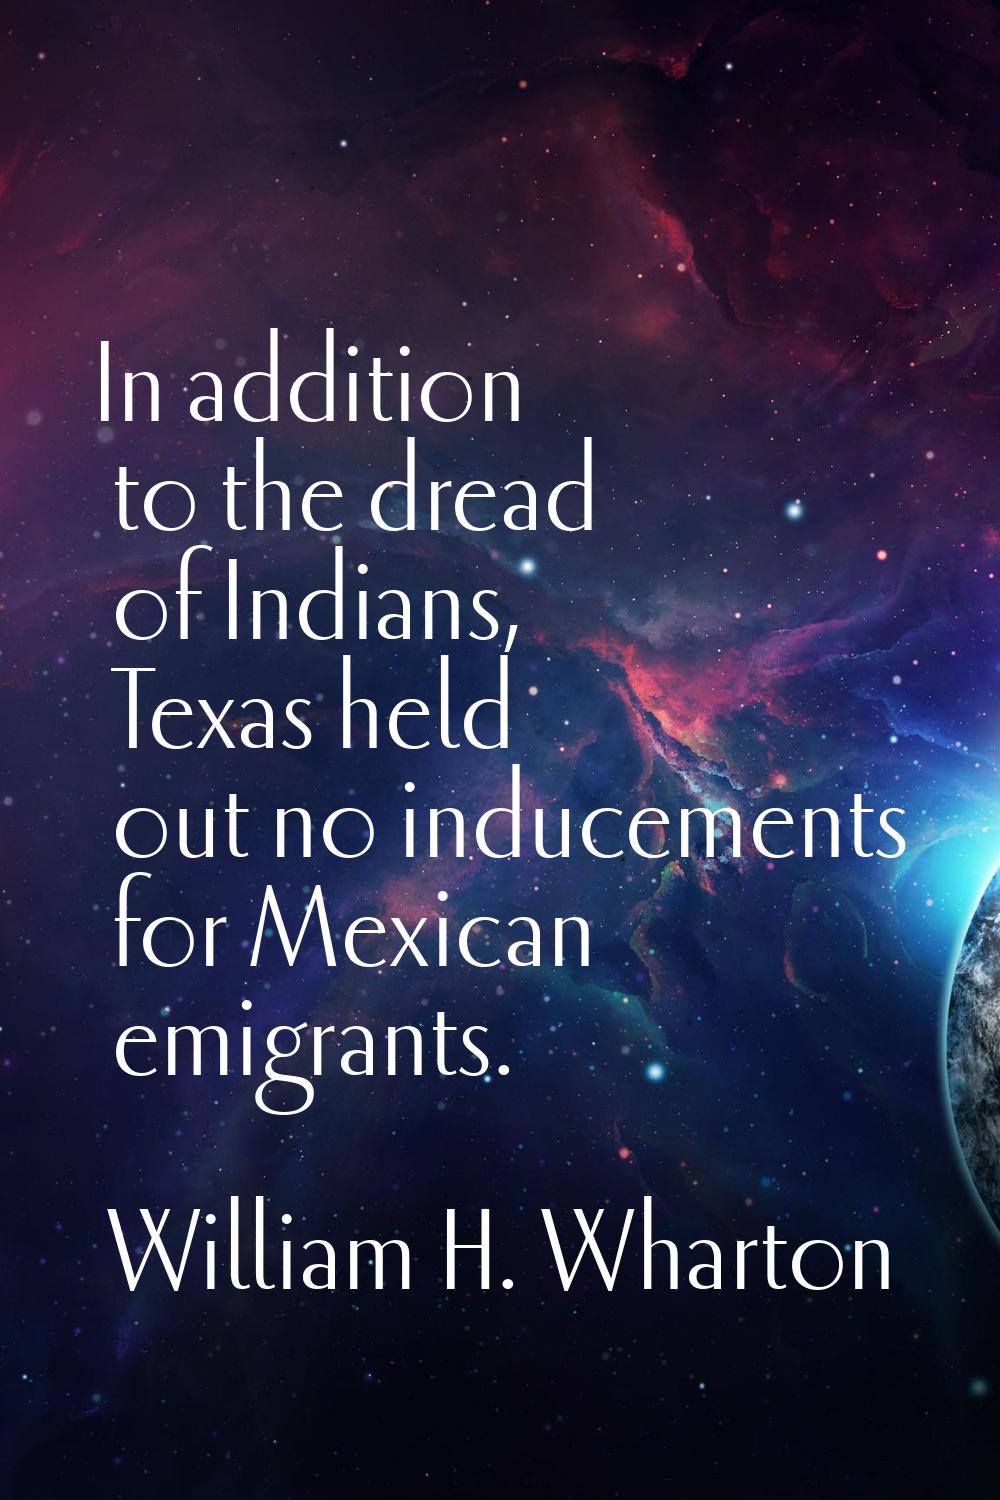 In addition to the dread of Indians, Texas held out no inducements for Mexican emigrants.